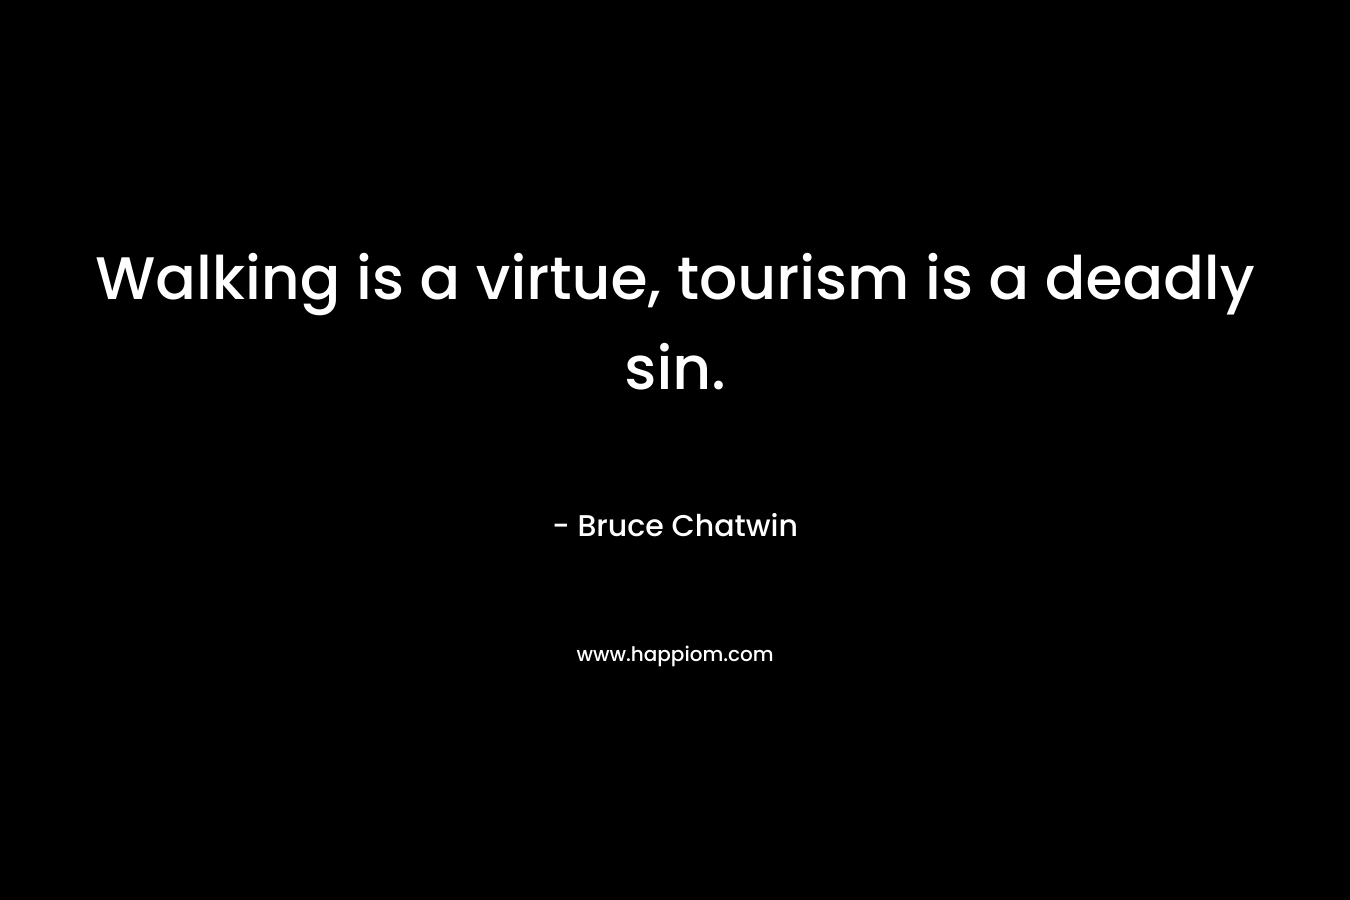 Walking is a virtue, tourism is a deadly sin. – Bruce Chatwin